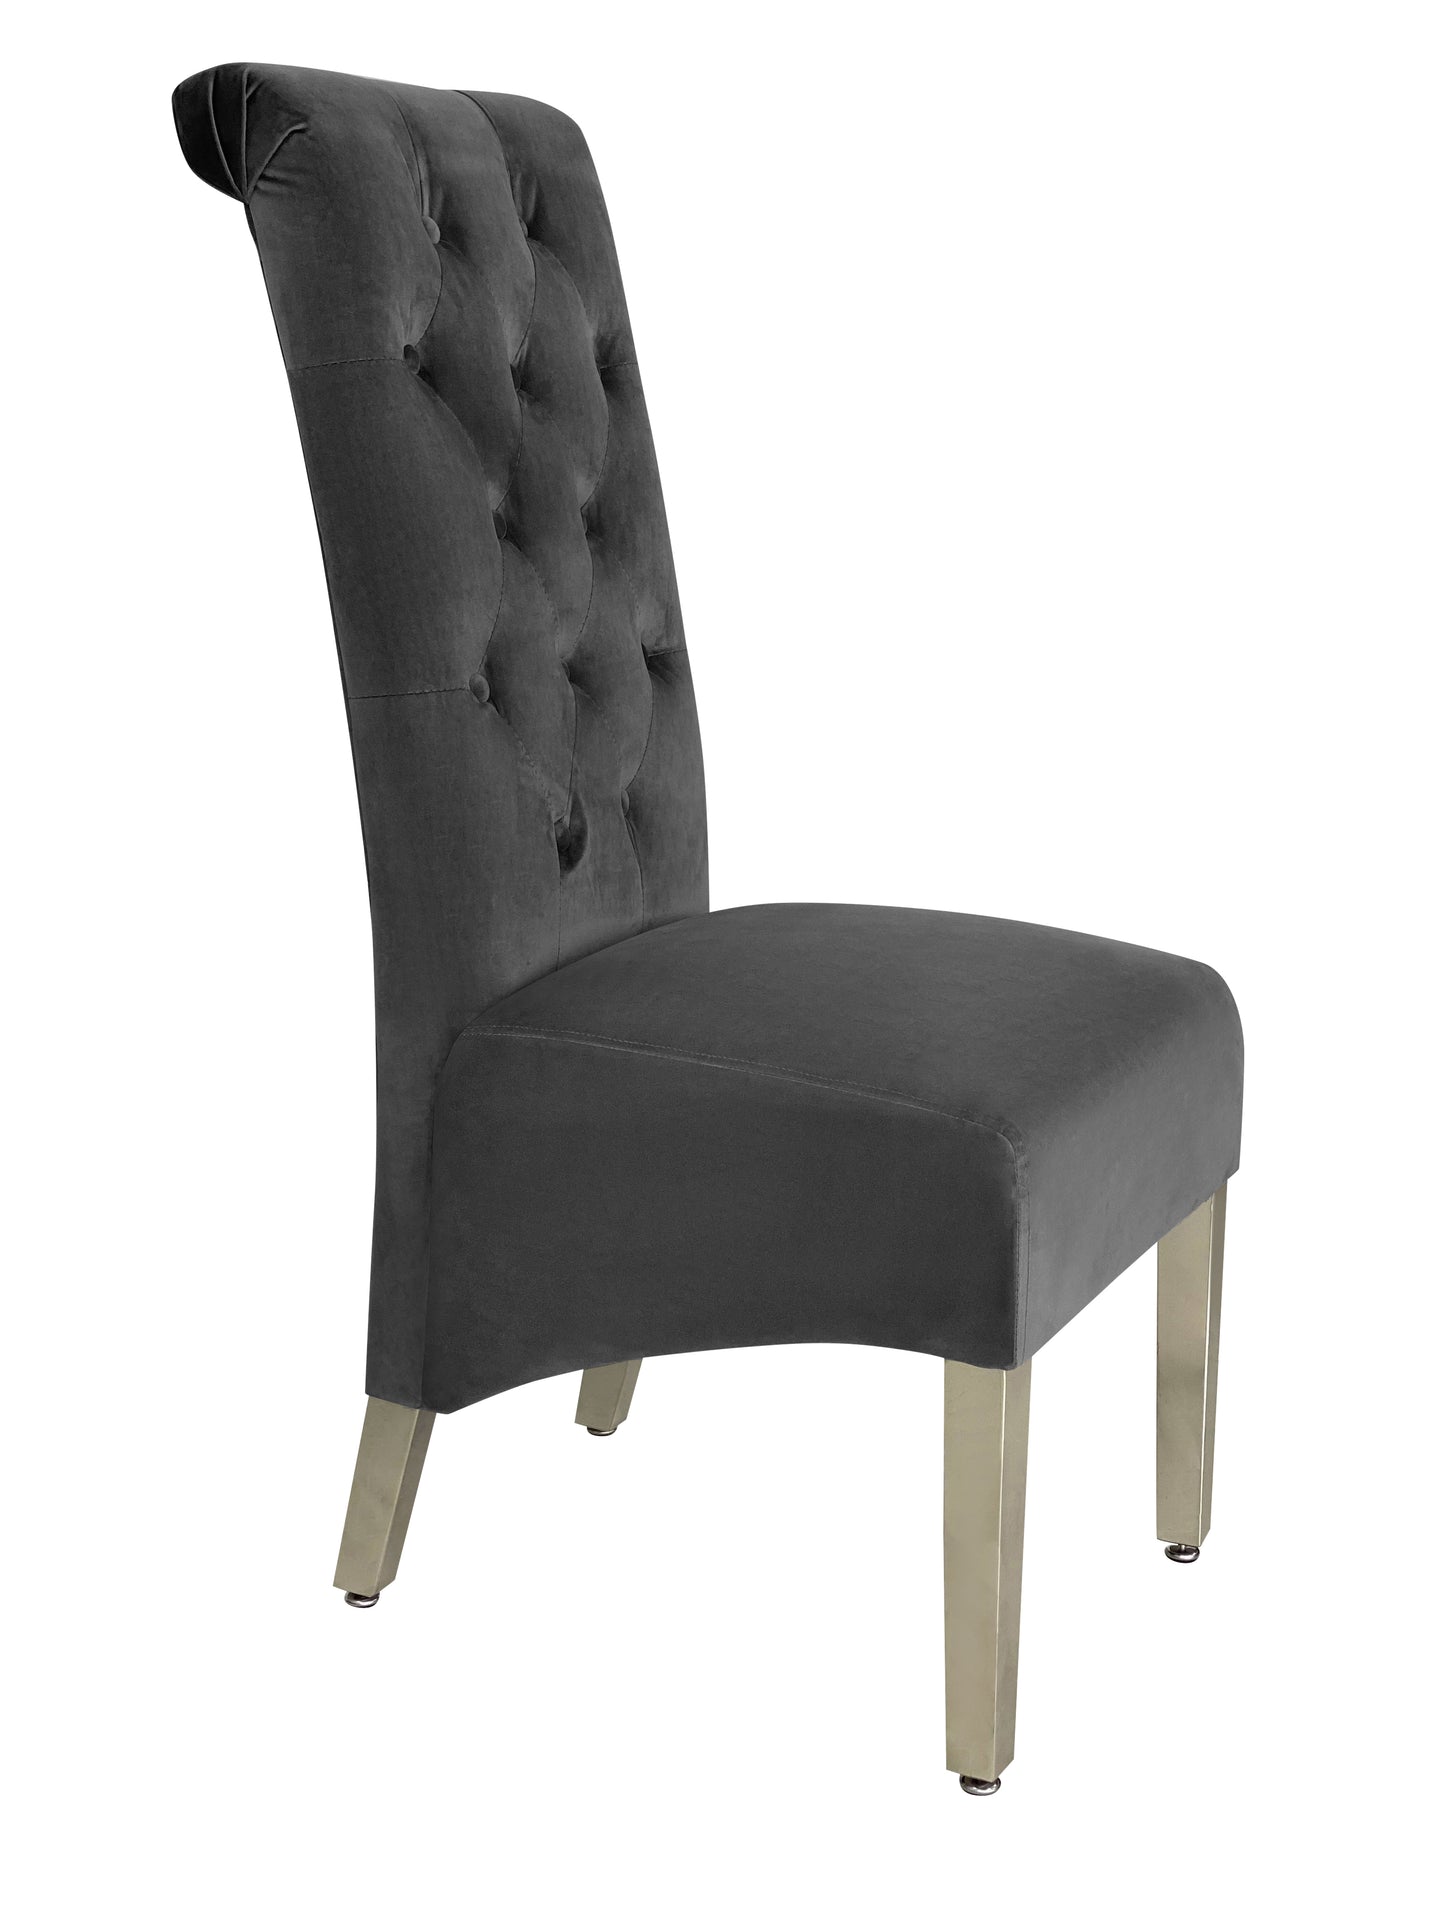 Sofa Dining Chair in Grey velvet Fabric Lion Knocker Back with Chrome Polished Steel Legs (Set of 2 chairs)